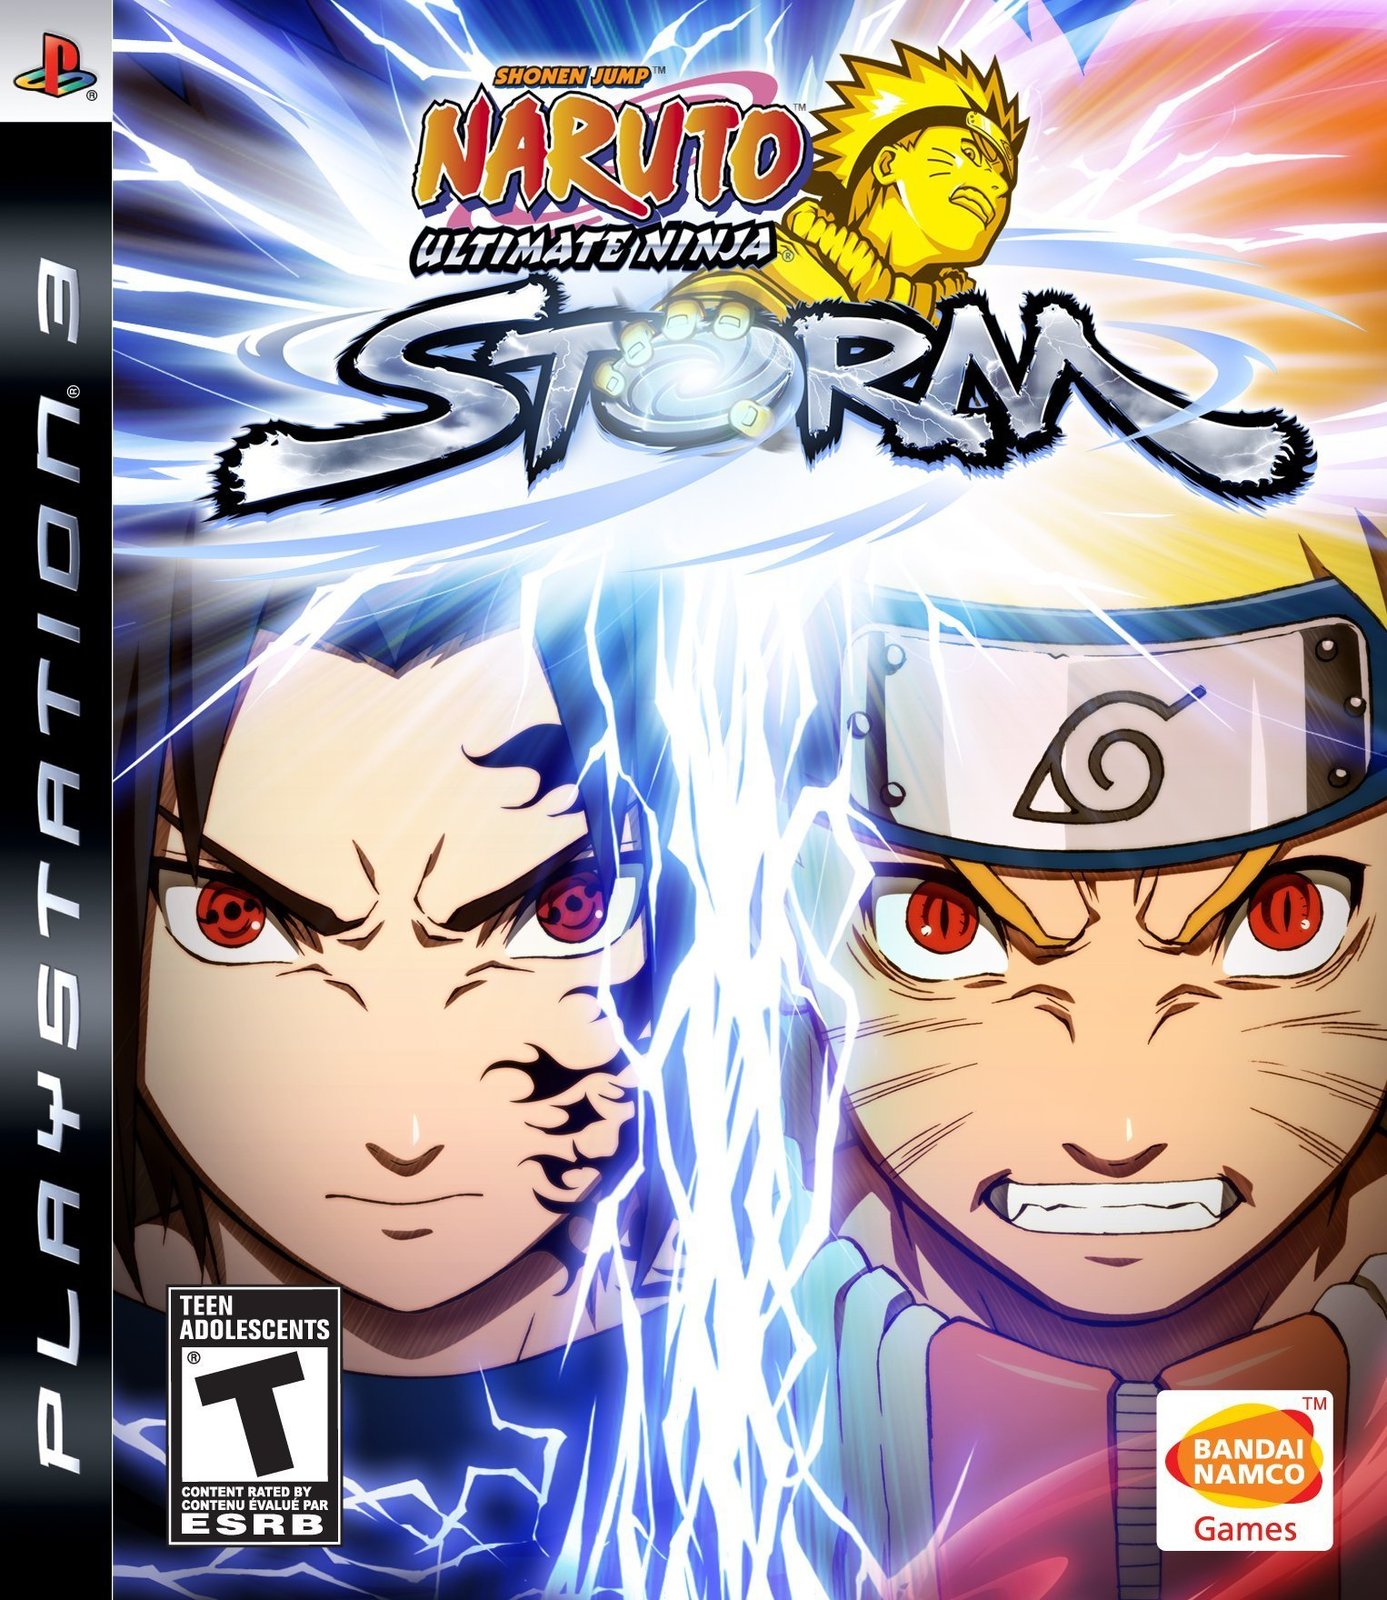 when is naruto shippuden storm 4 coming out